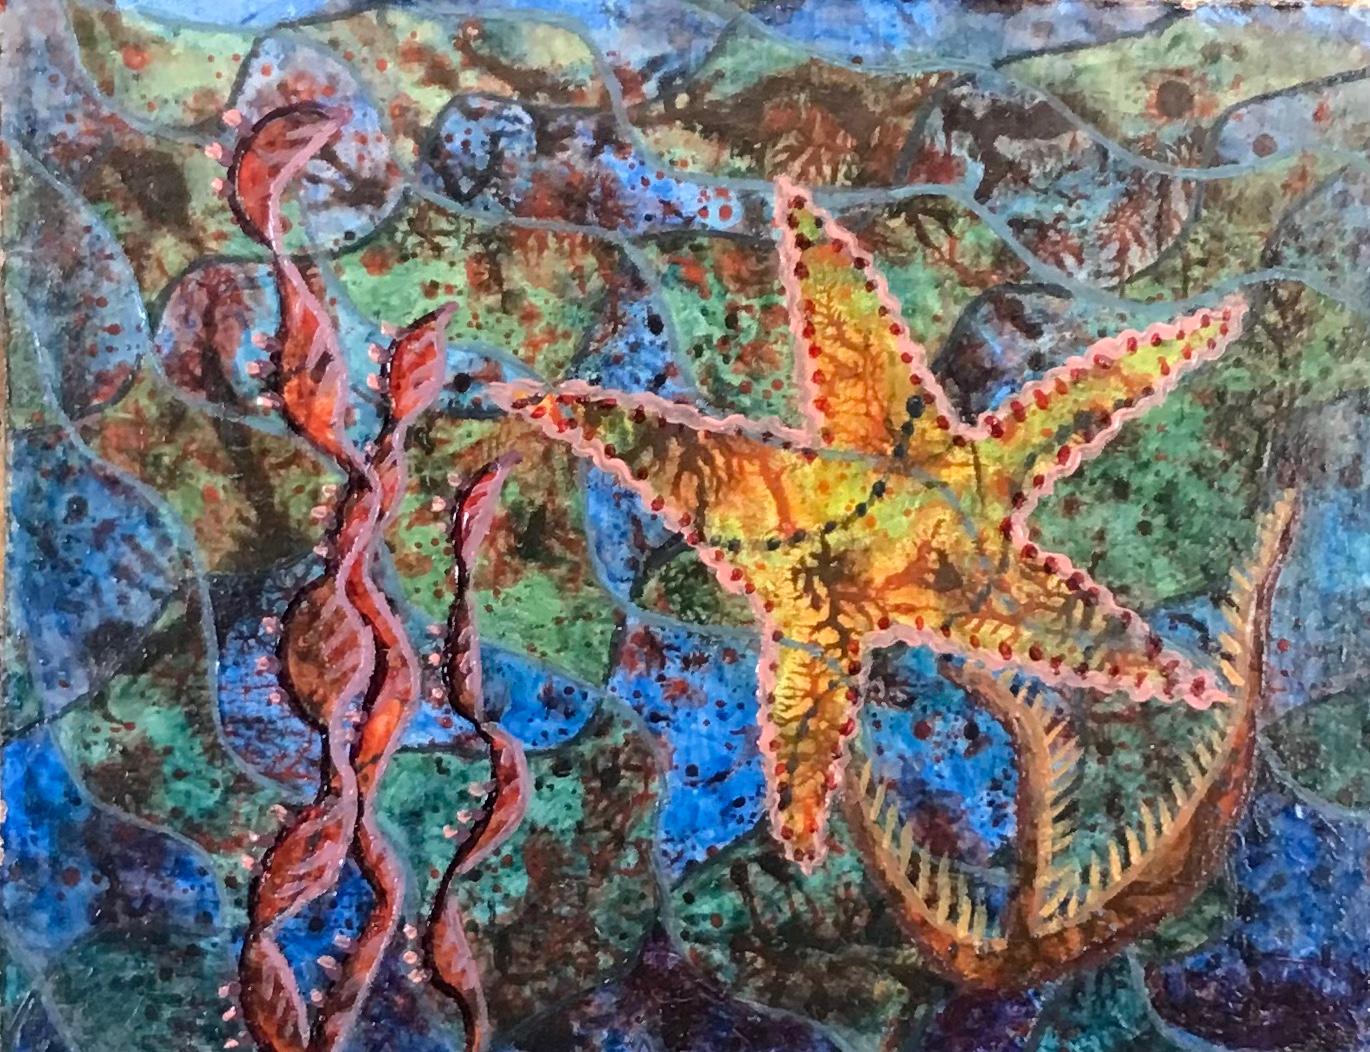 Elvic Steele Abstract Painting - 1960's British Surrealist Oil Painting -Colourful Under The Sea Abstract